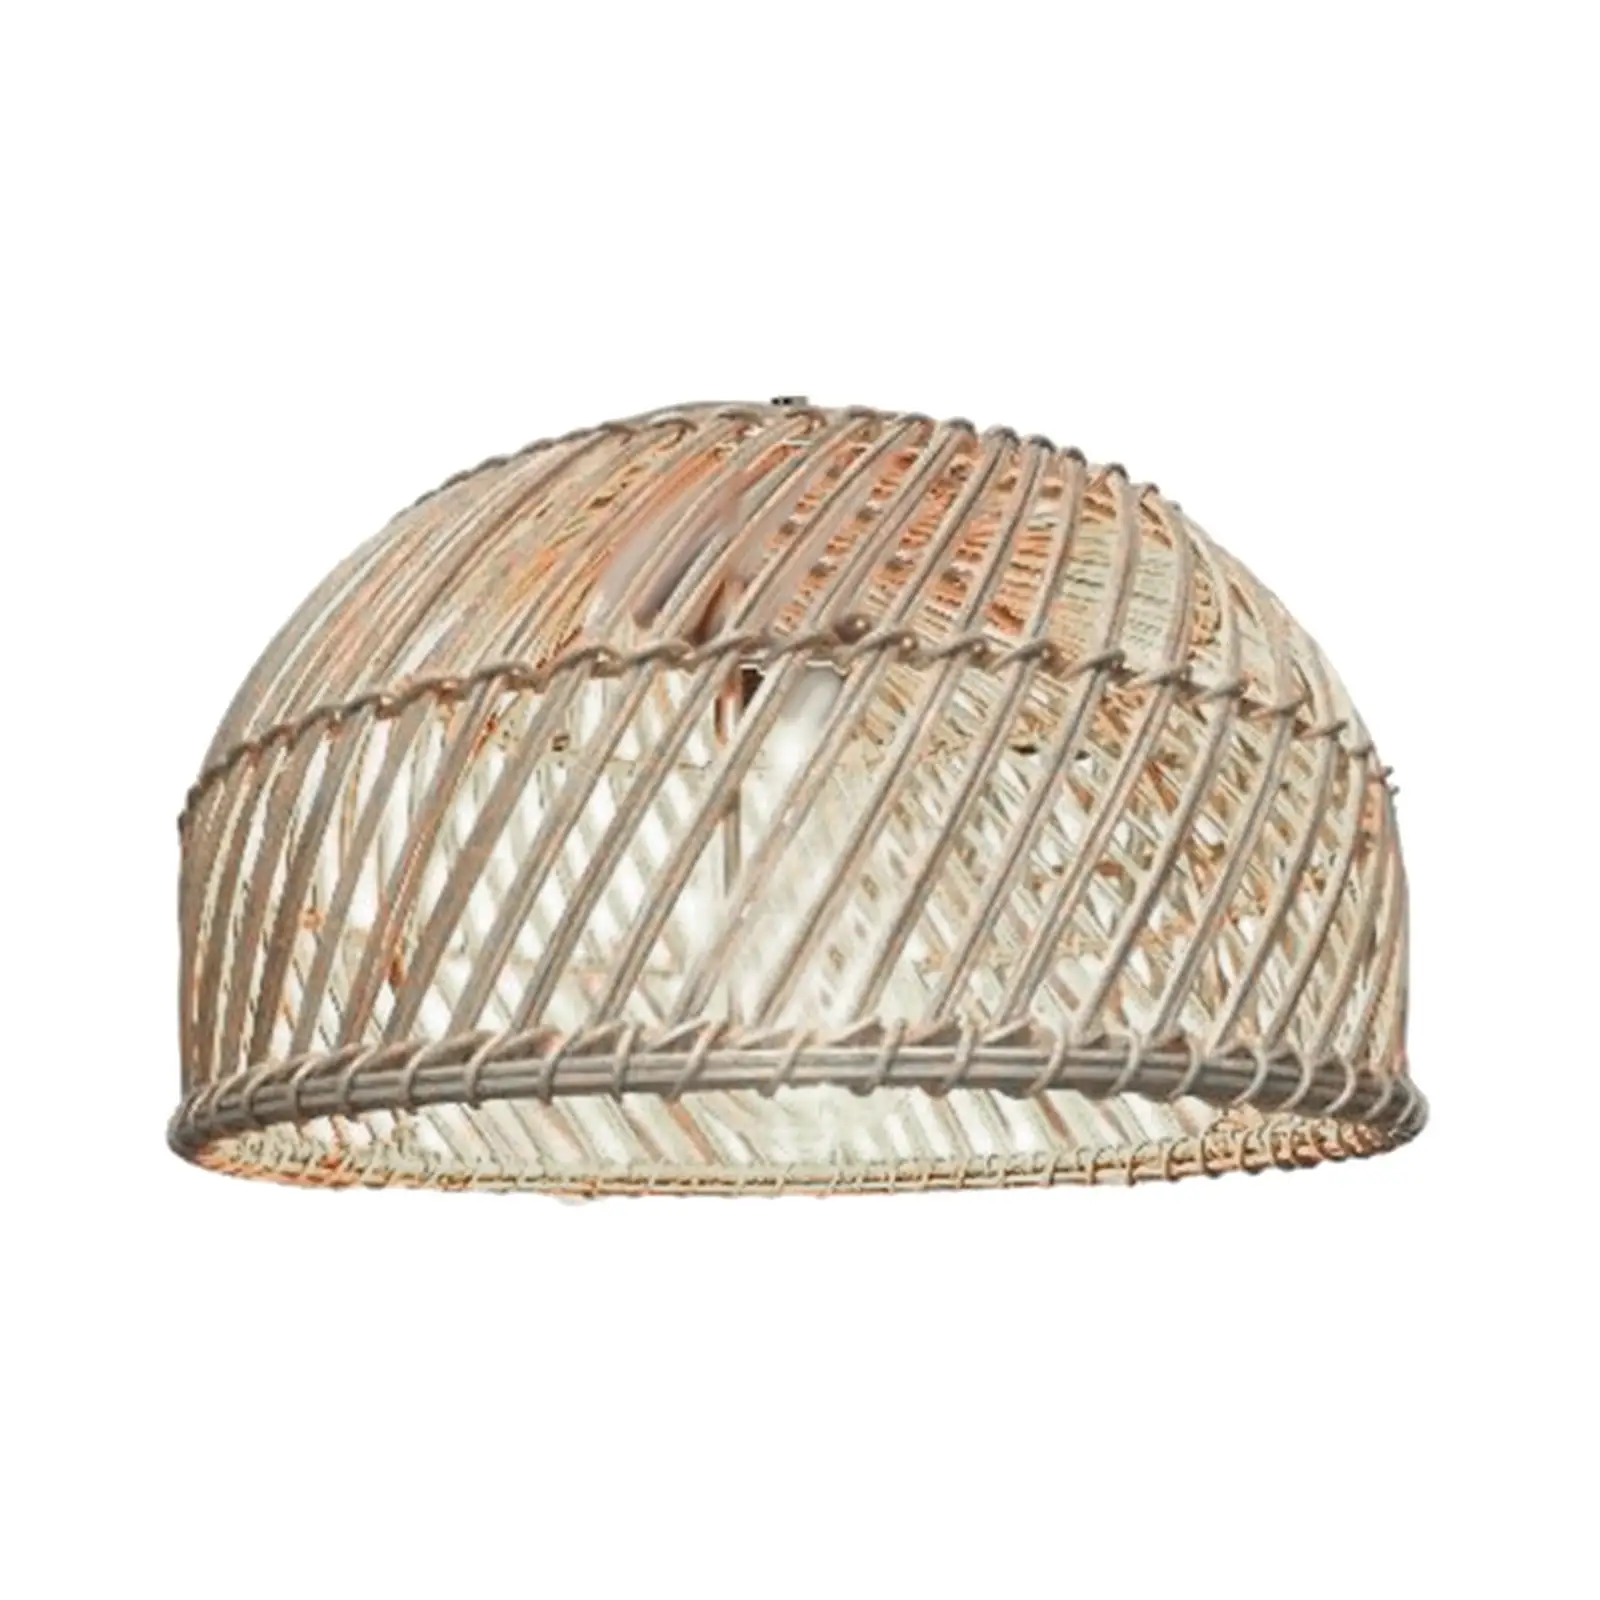 Retro Rattan Woven Lampshade Handmade Ceiling Pendant Light Shade Rustic Chandelier Cover for Bedroom Cafe Restaurant Teahouse